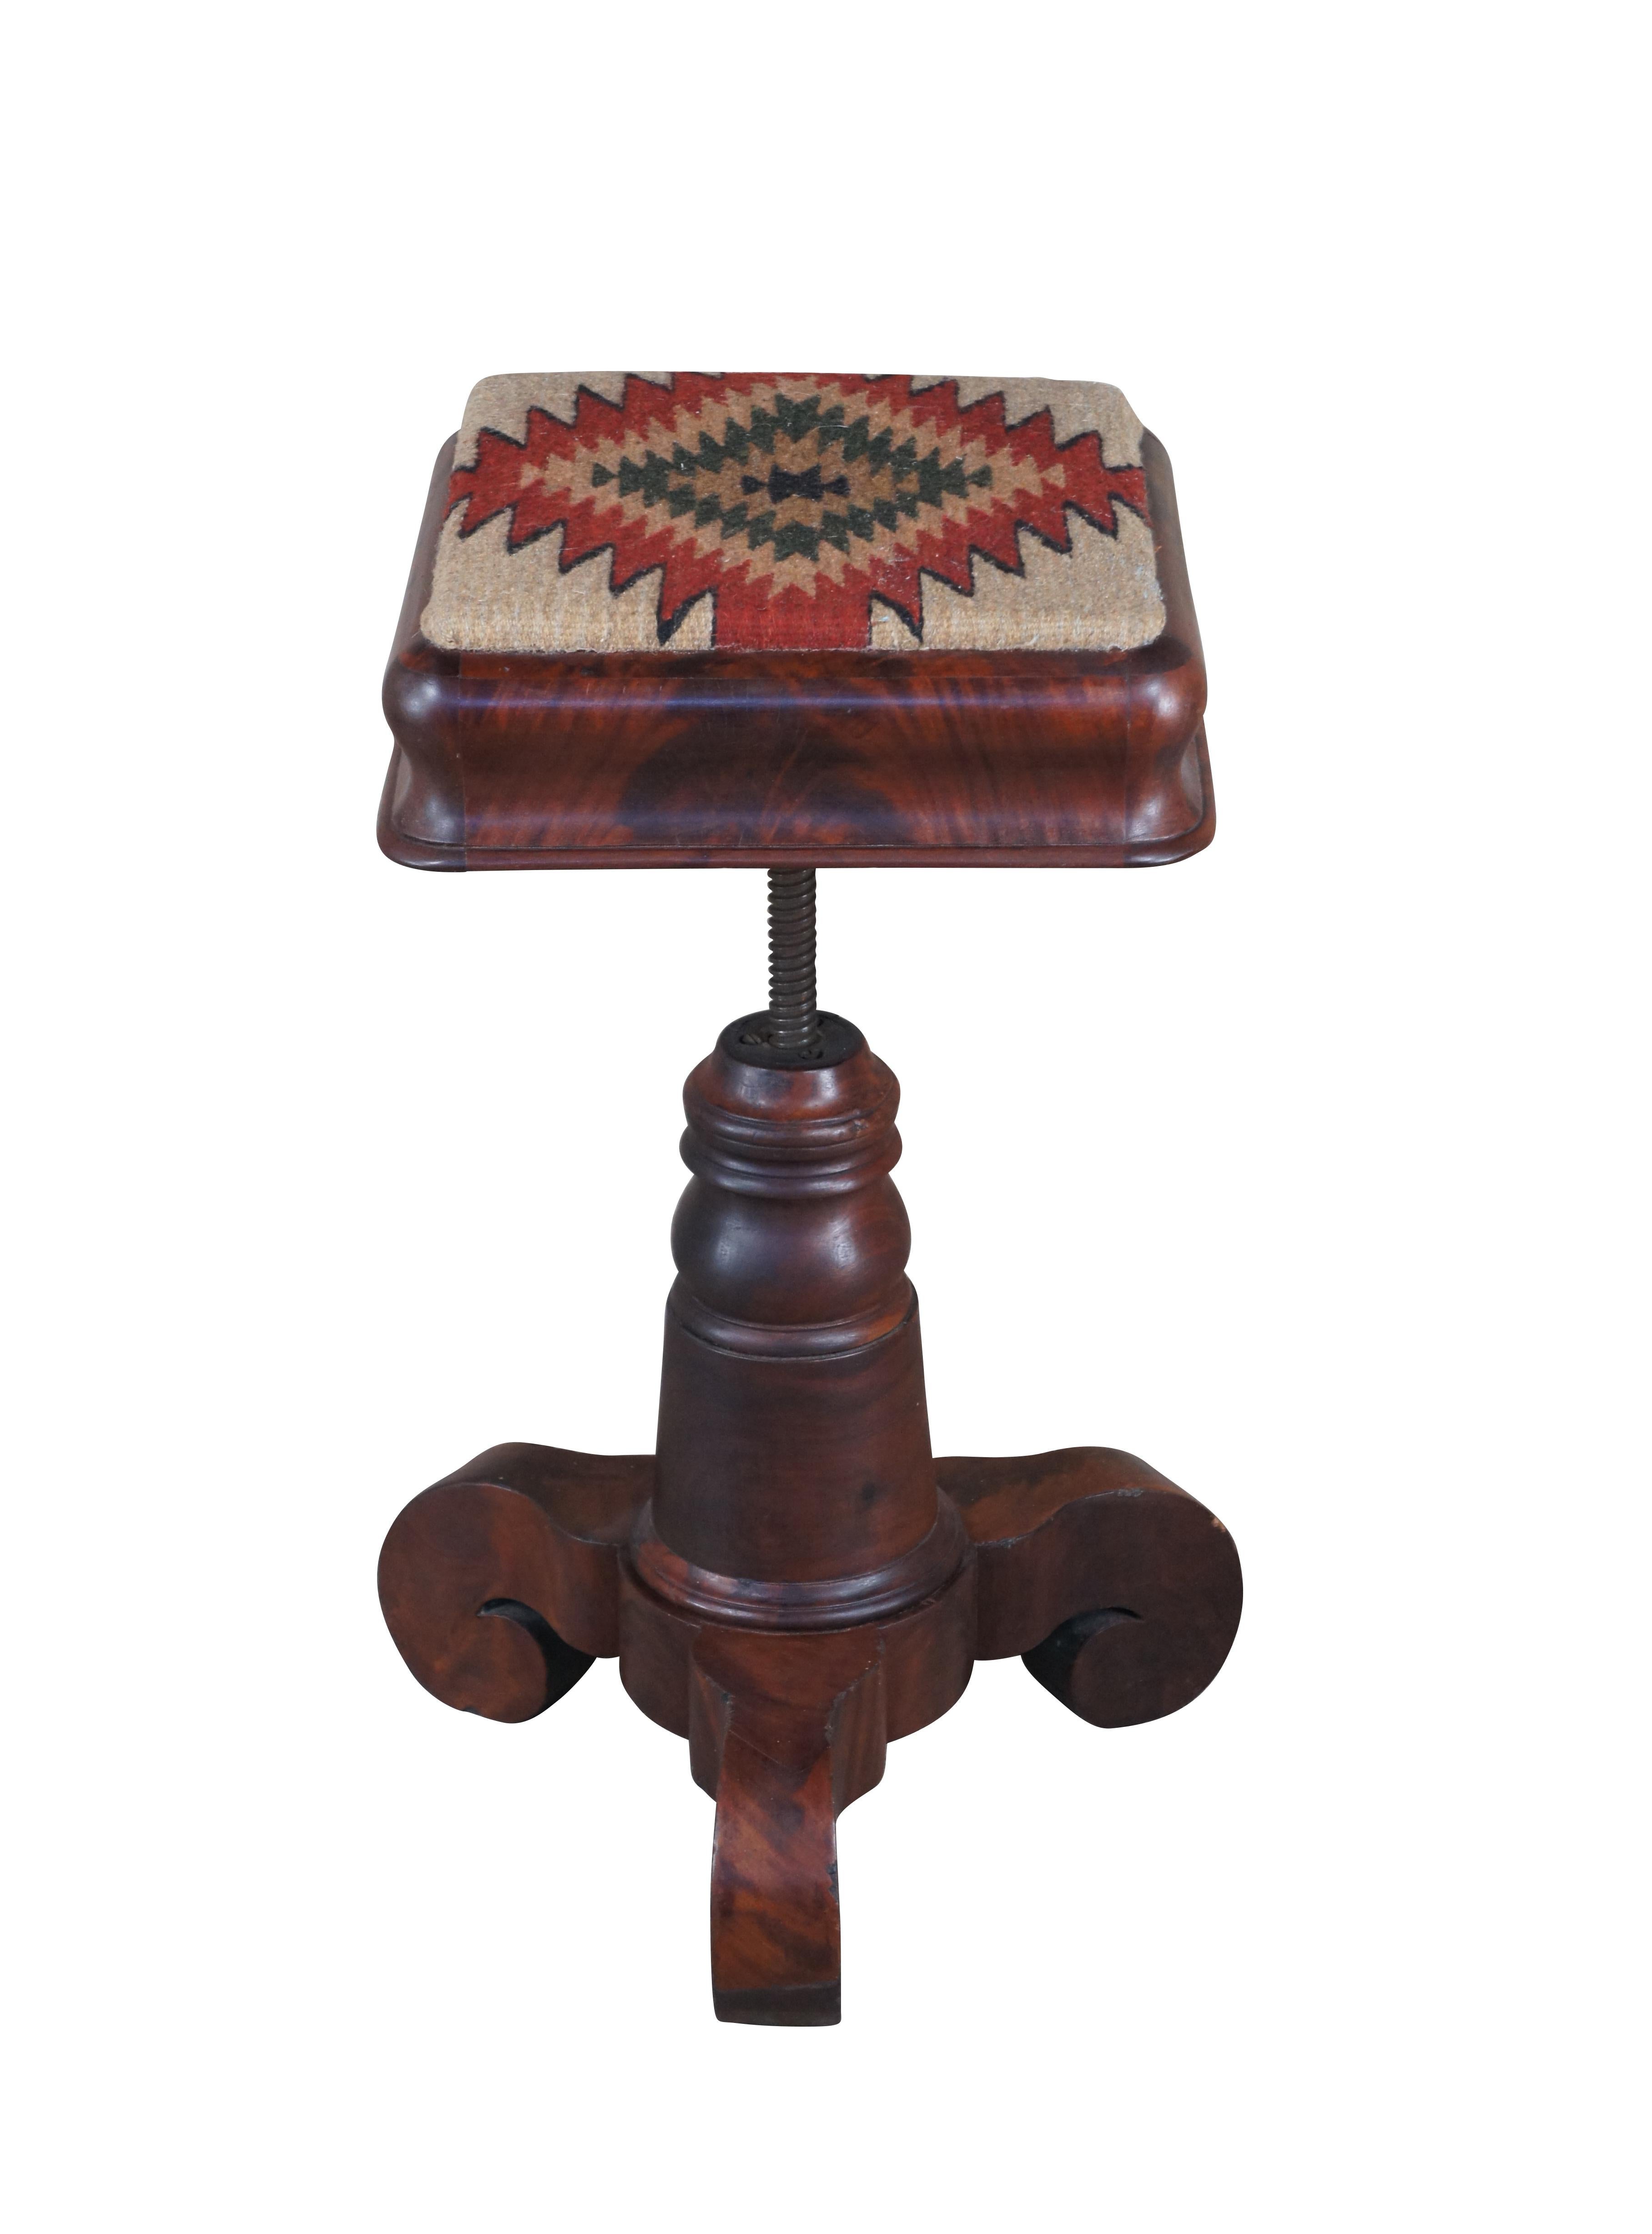 Antique 19th C. American Empire Classicism Crotch Mahogany Piano Stool Adjusts In Good Condition For Sale In Dayton, OH